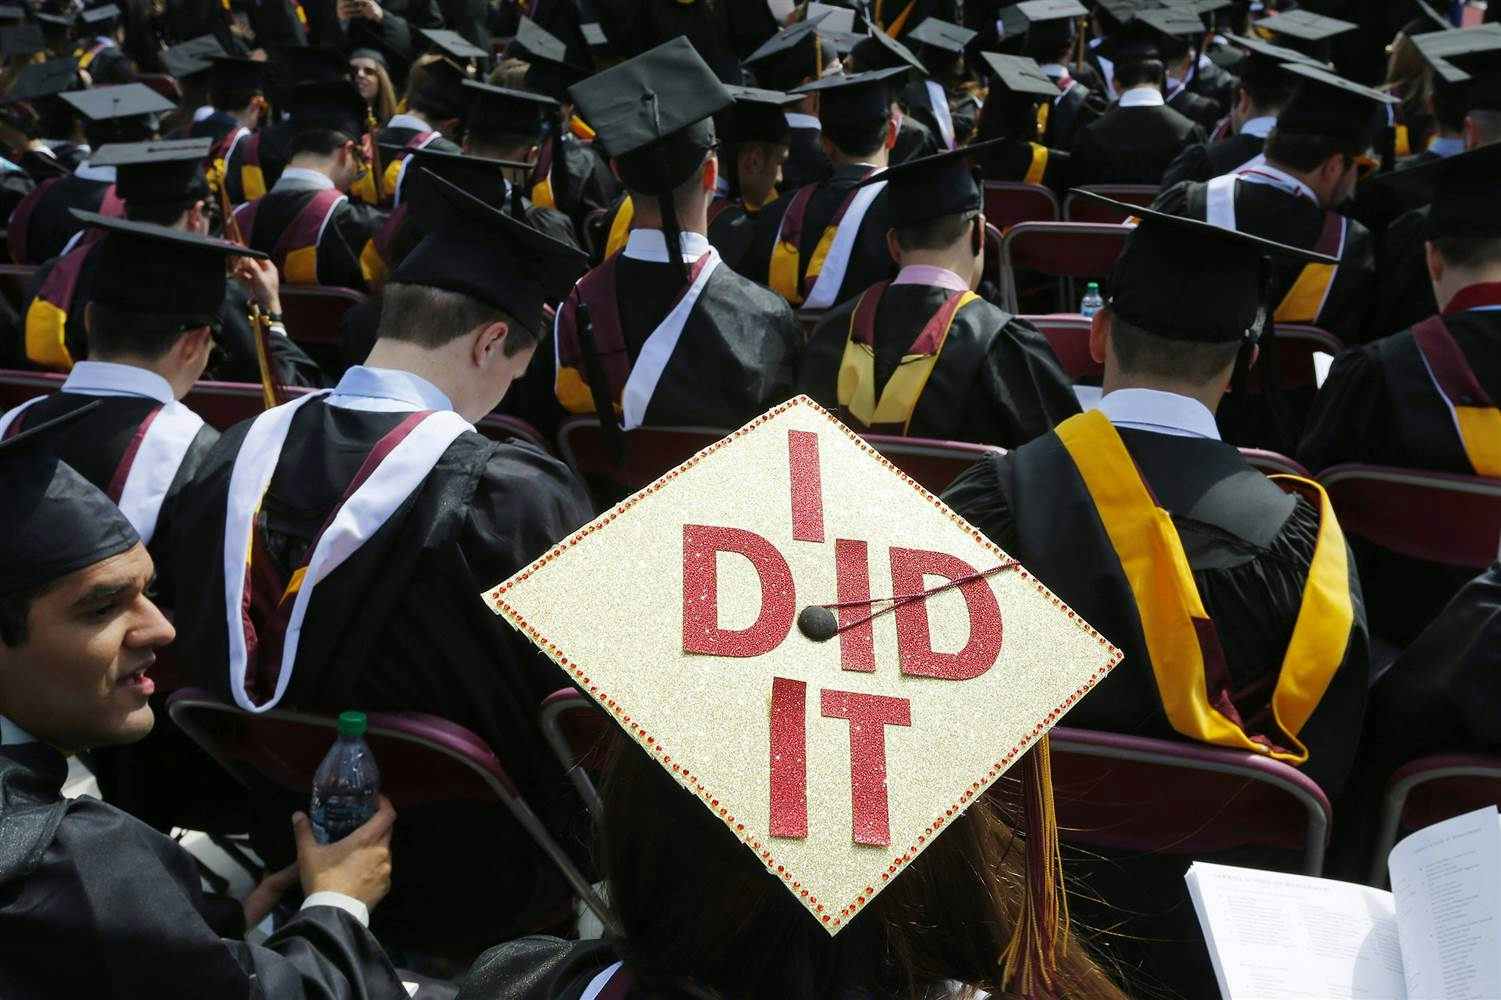 Crowd of new graduates one hat reads, "I did it